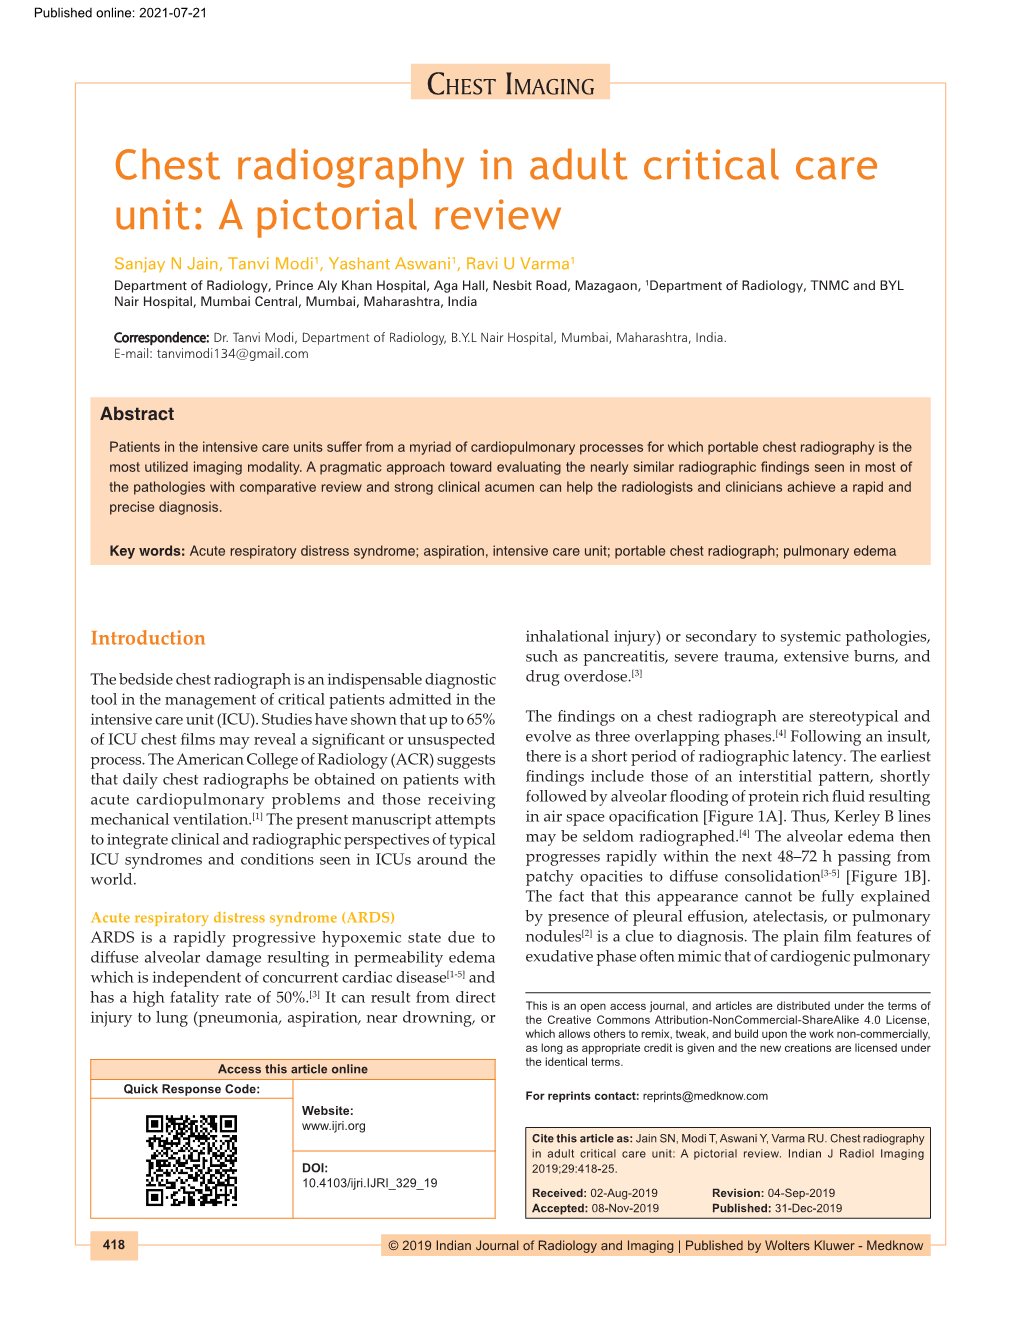 Chest Radiography in Adult Critical Care Unit: a Pictorial Review